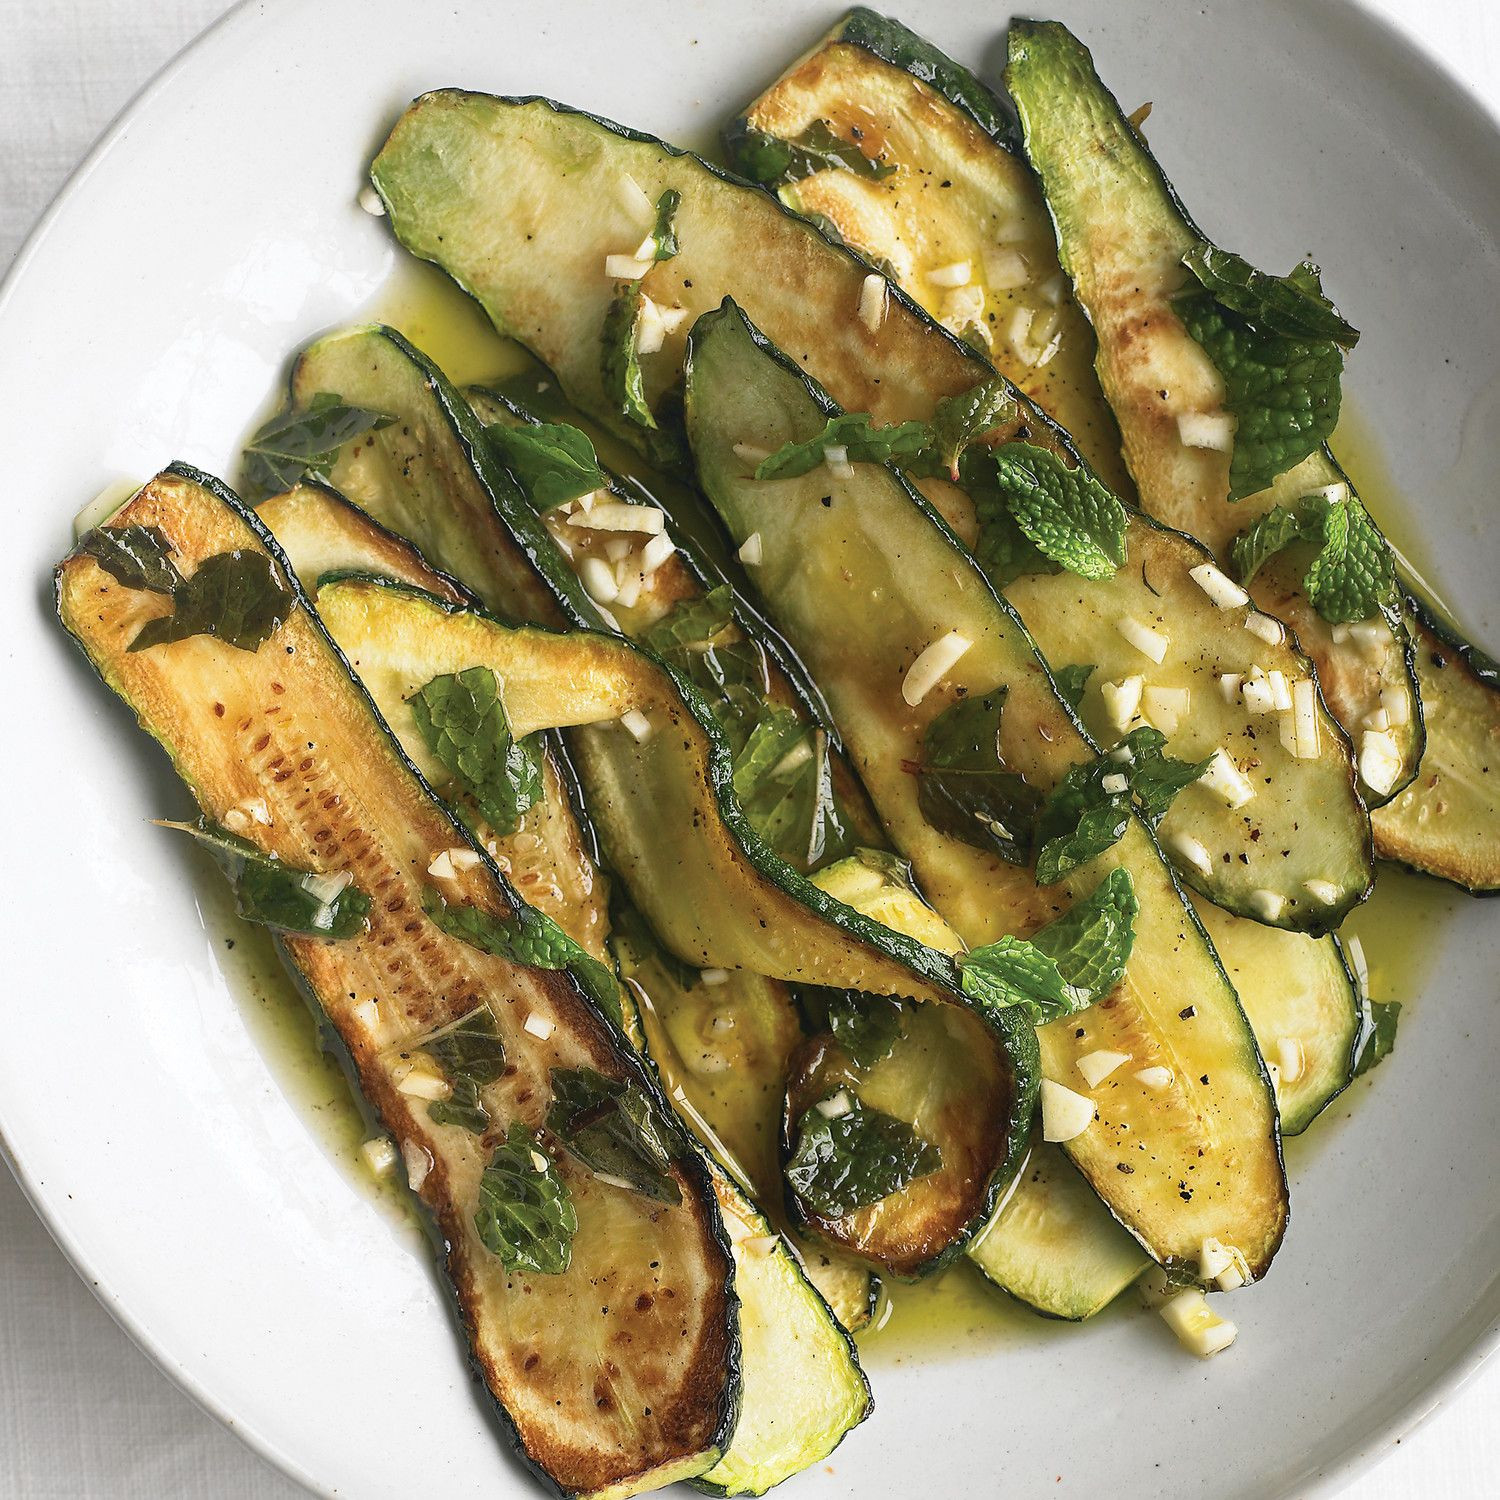 Side Dishes To Go With Lamb
 Marinated Zucchini with Mint Recipe